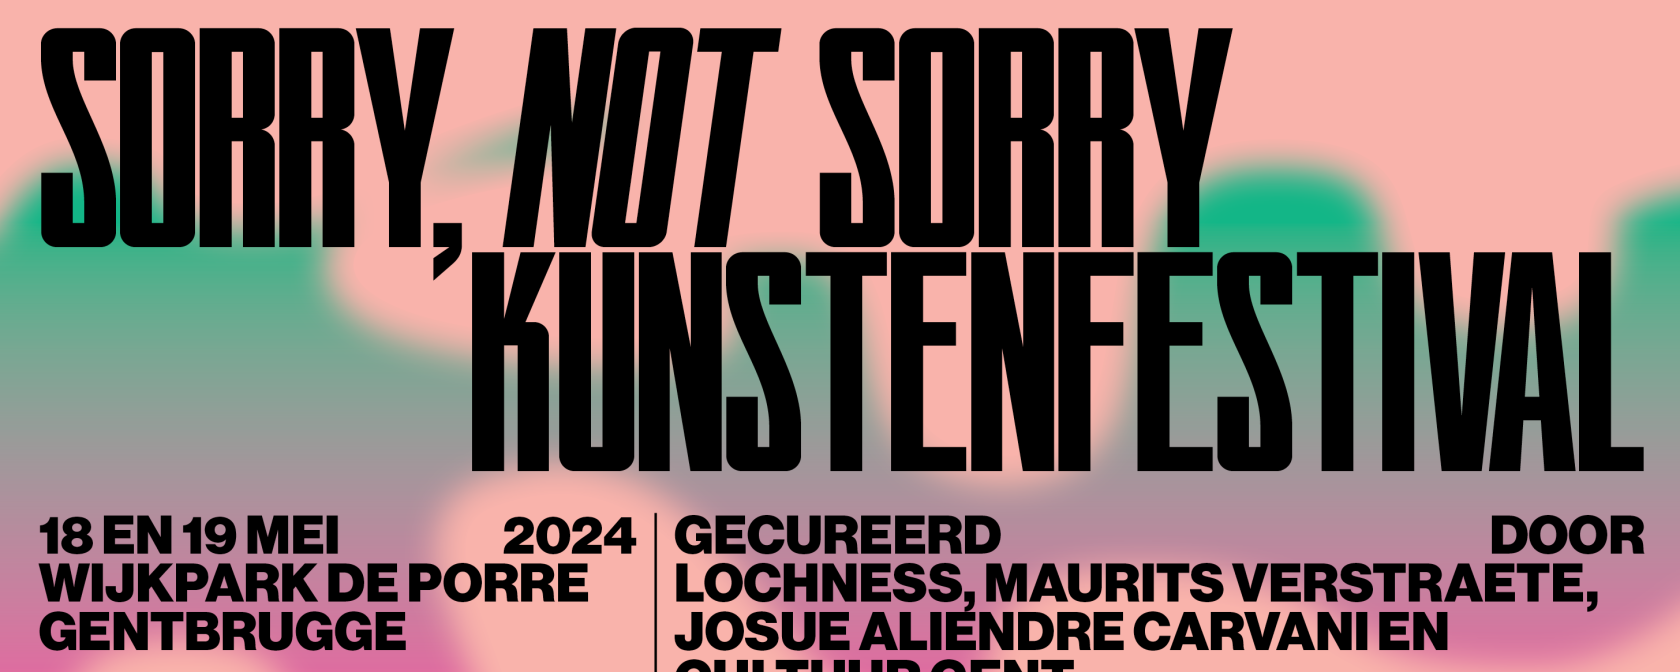 Sorry, Not Sorry kunstenfestival